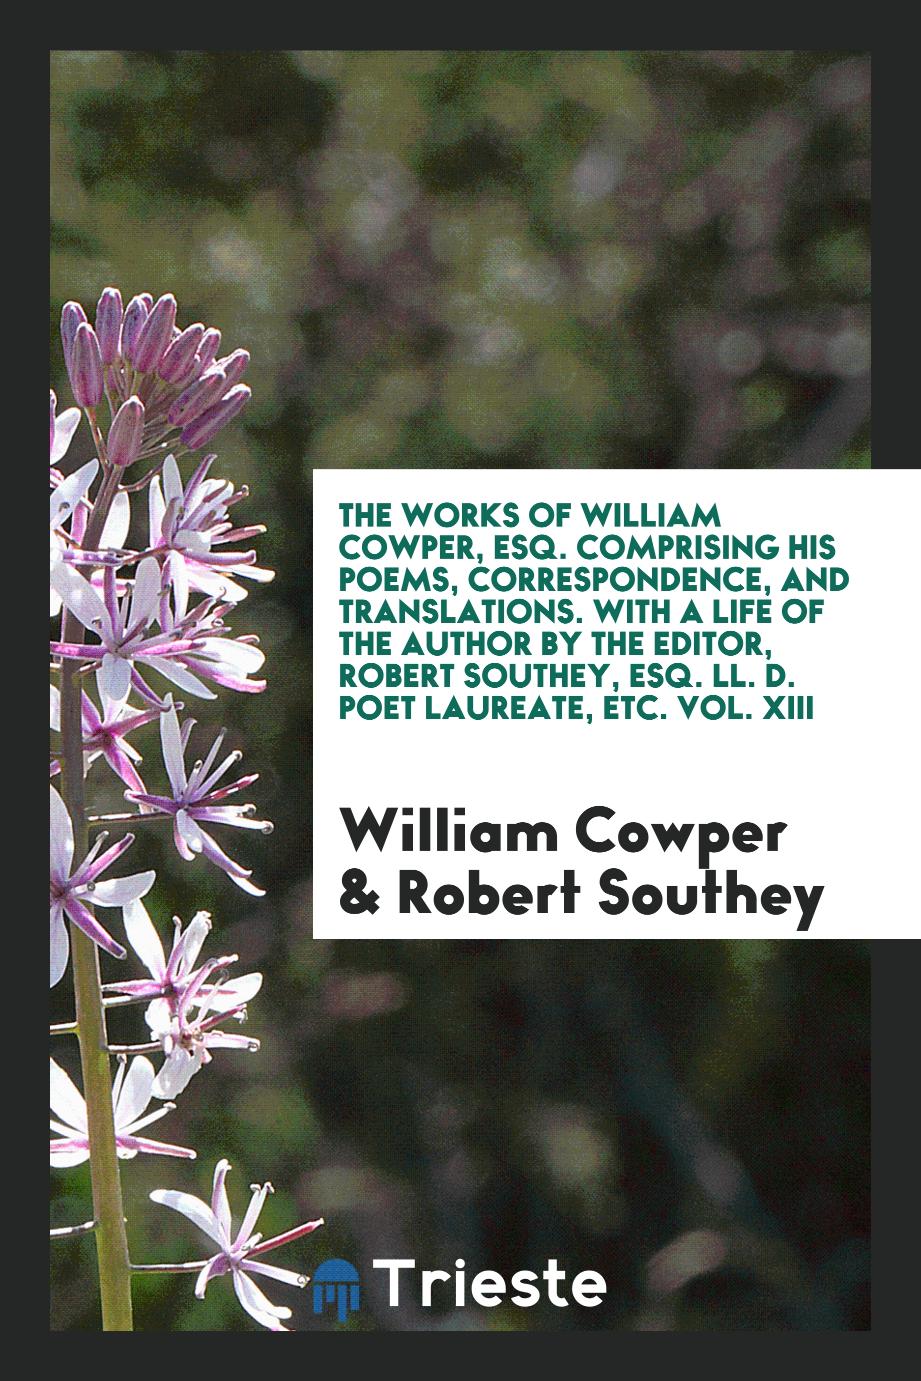 The Works of William Cowper, Esq. Comprising His Poems, Correspondence, and Translations. With a Life of the Author by the Editor, Robert Southey, Esq. LL. D. Poet Laureate, Etc. Vol. XIII